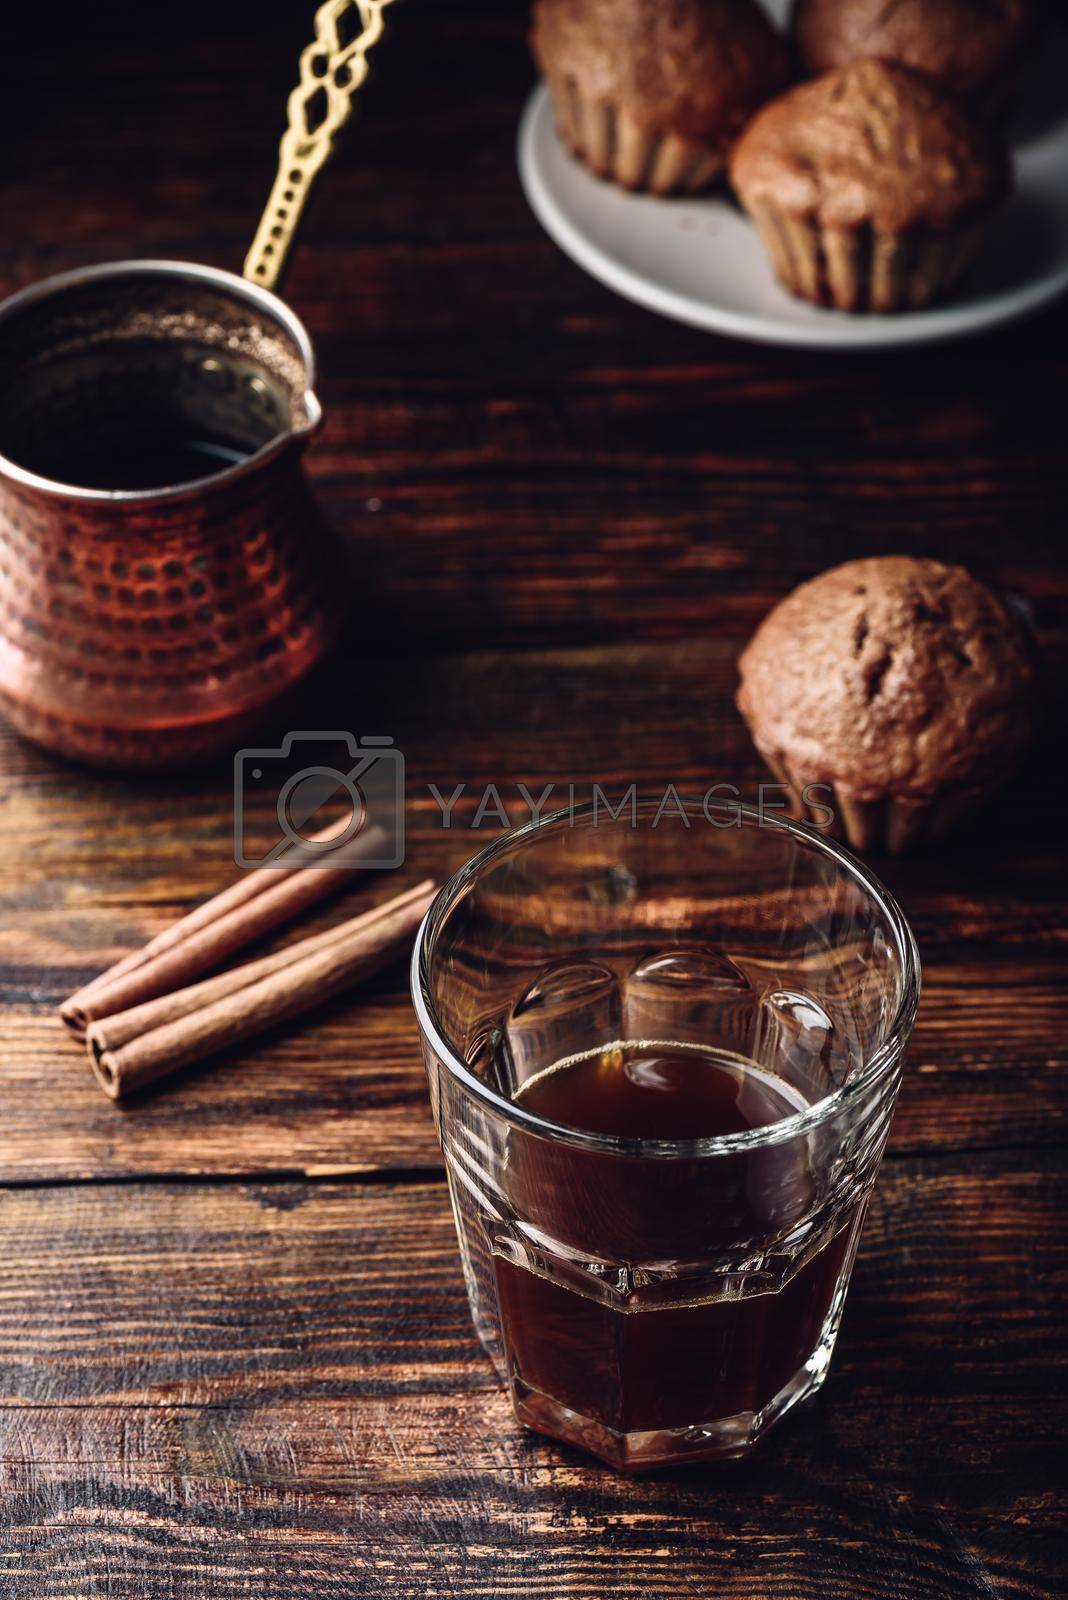 Royalty free image of Turkish coffee with spices and muffins by Seva_blsv